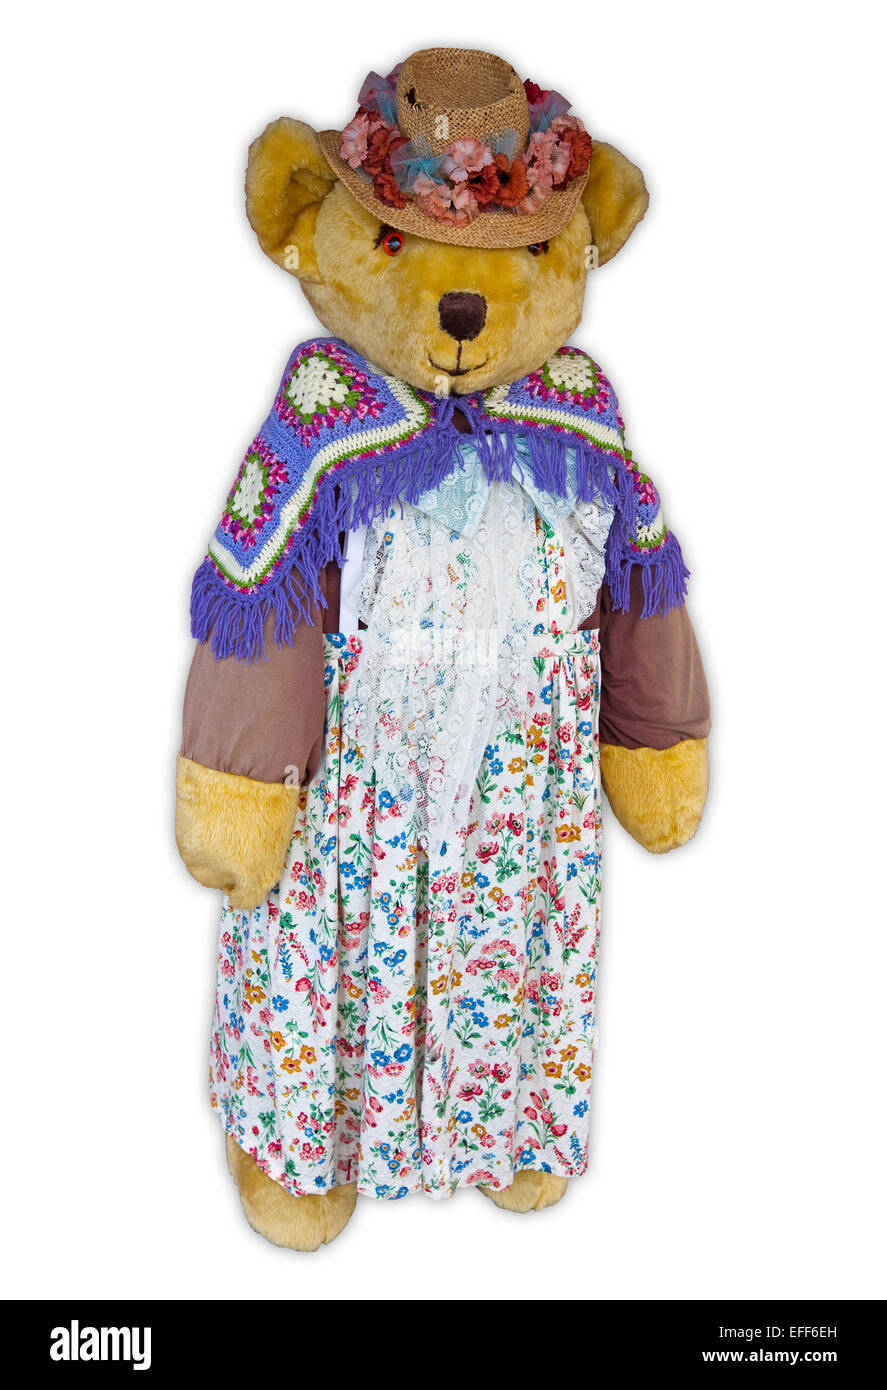 Gigantic life-sized teddy bear wearing floral dress, colourful woollen shawl & straw hat with flowers, against white background Stock Photo